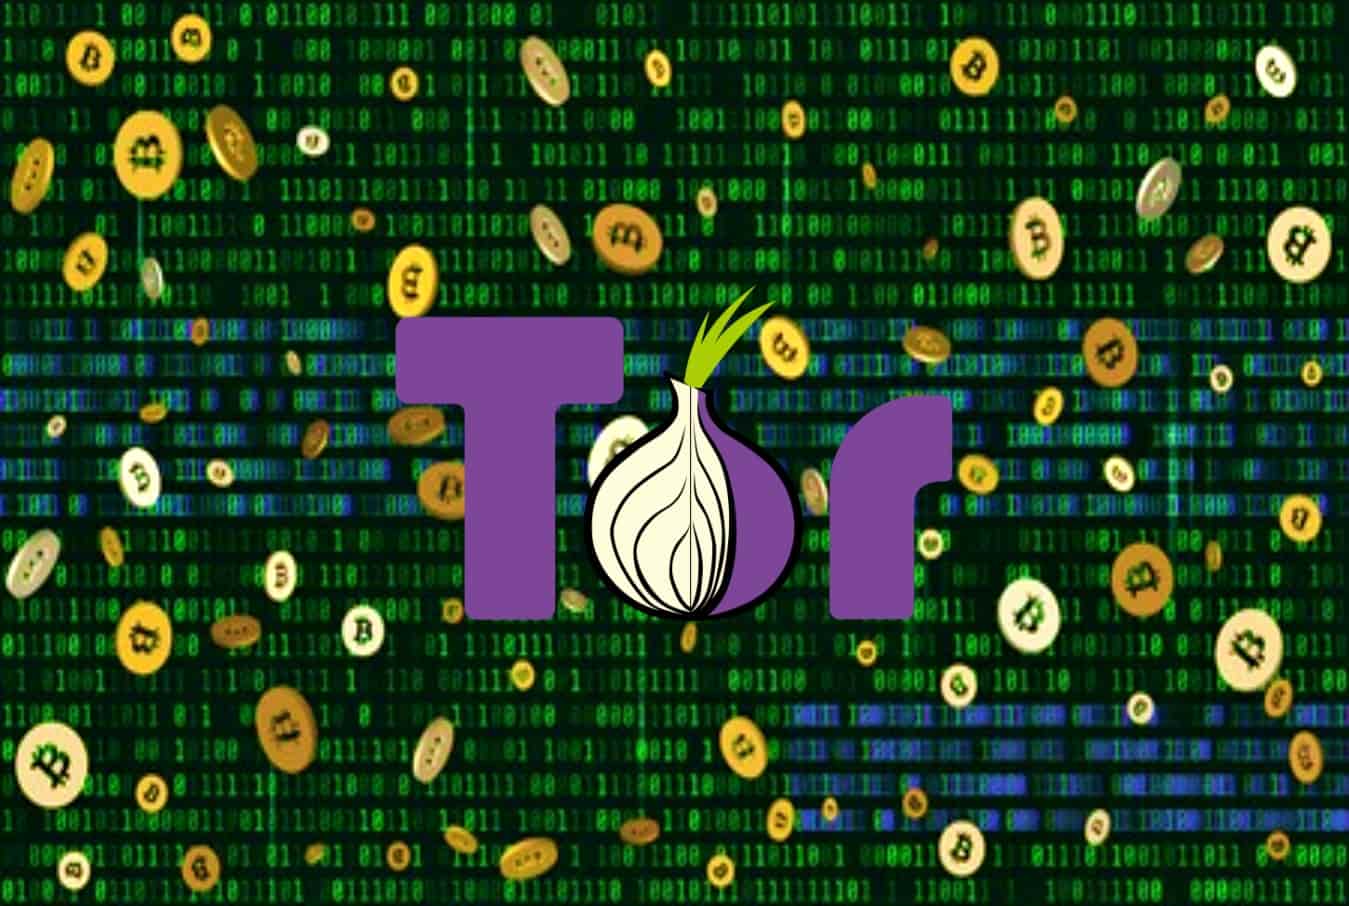 23% of Tor browser relays found to be stealing Bitcoin